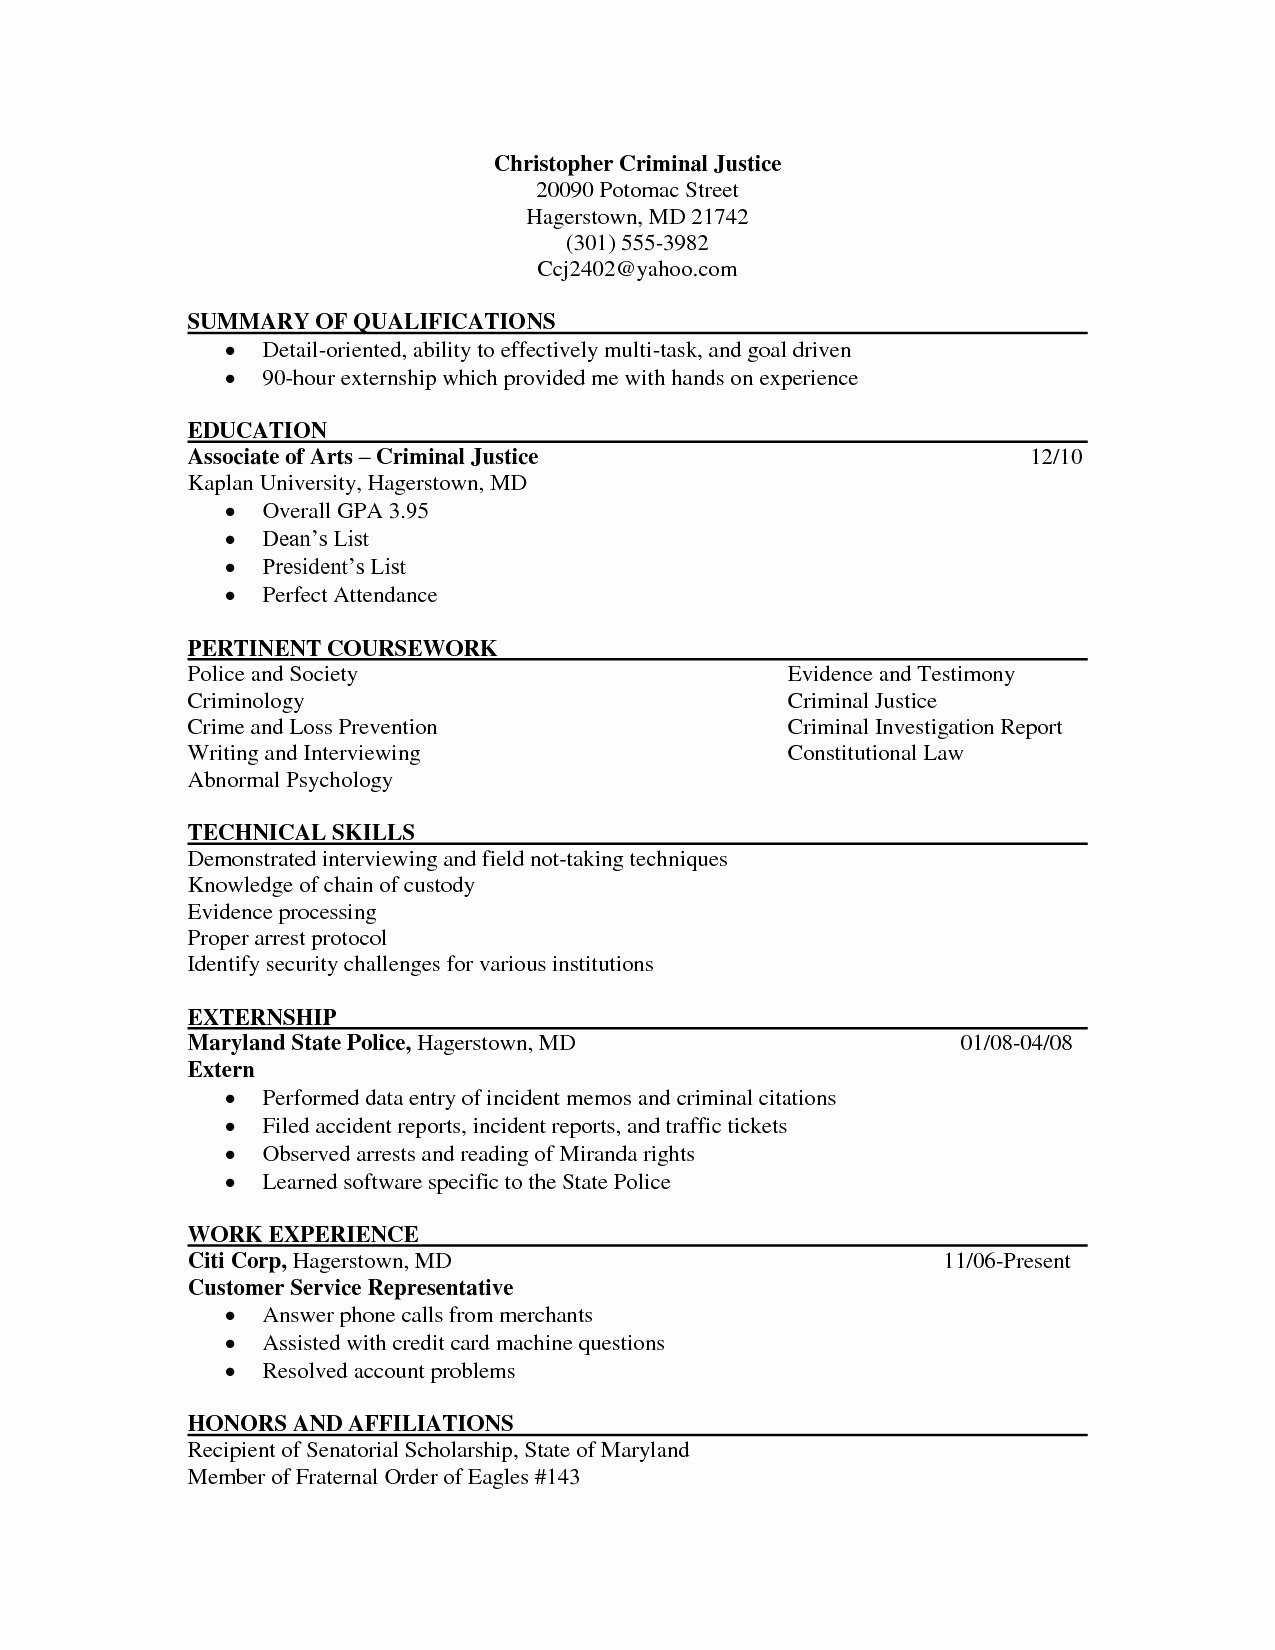 Resume Templates for Teens New Objective Resume Criminal